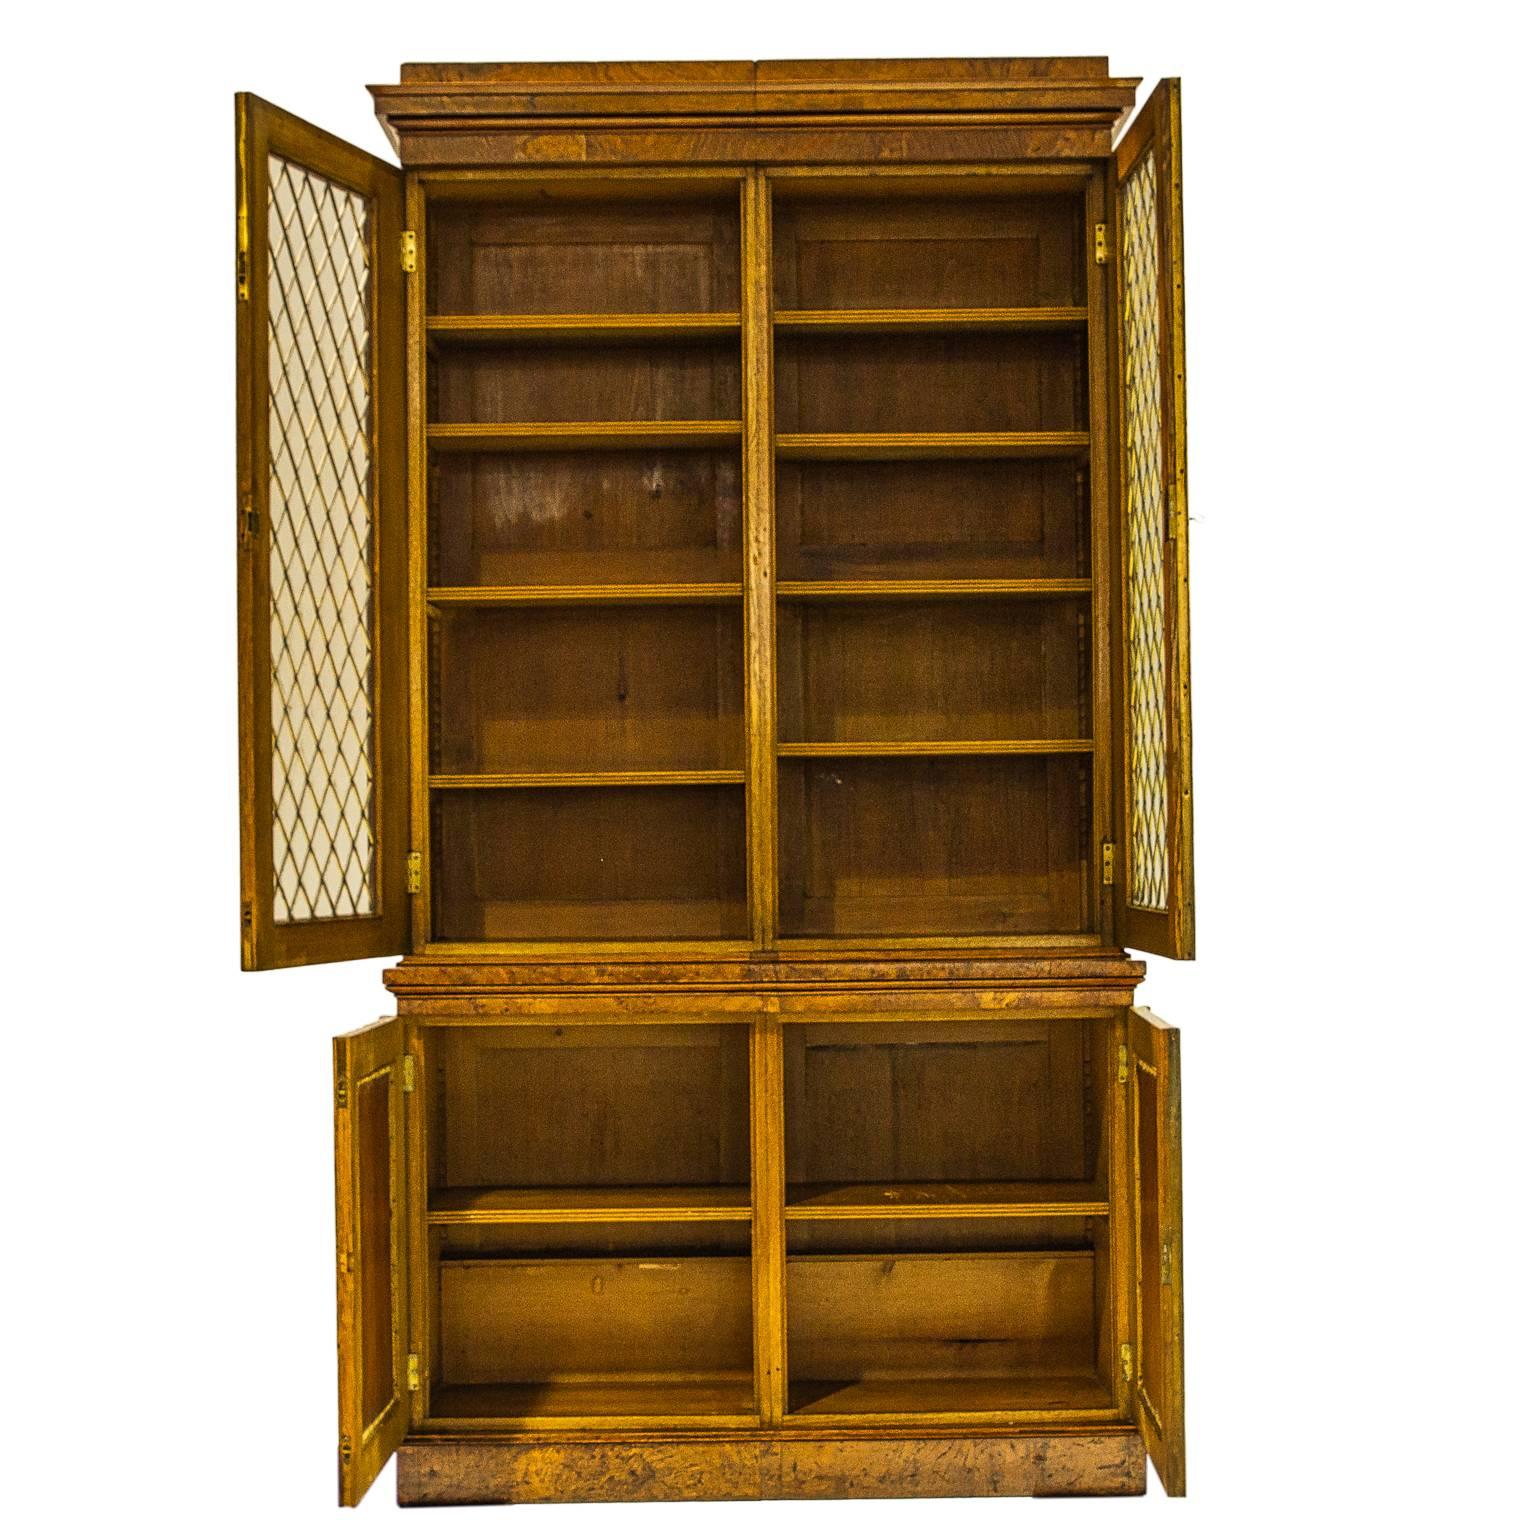 19th century Regency pollard oak cabinet. Beautiful glass front bookcase/cabinet crafted in eye-catching pippy oak veneer. Lower cabinet features exquisite fabric panels under the brass mesh to provide discreet storage of your items. Brass hardware,